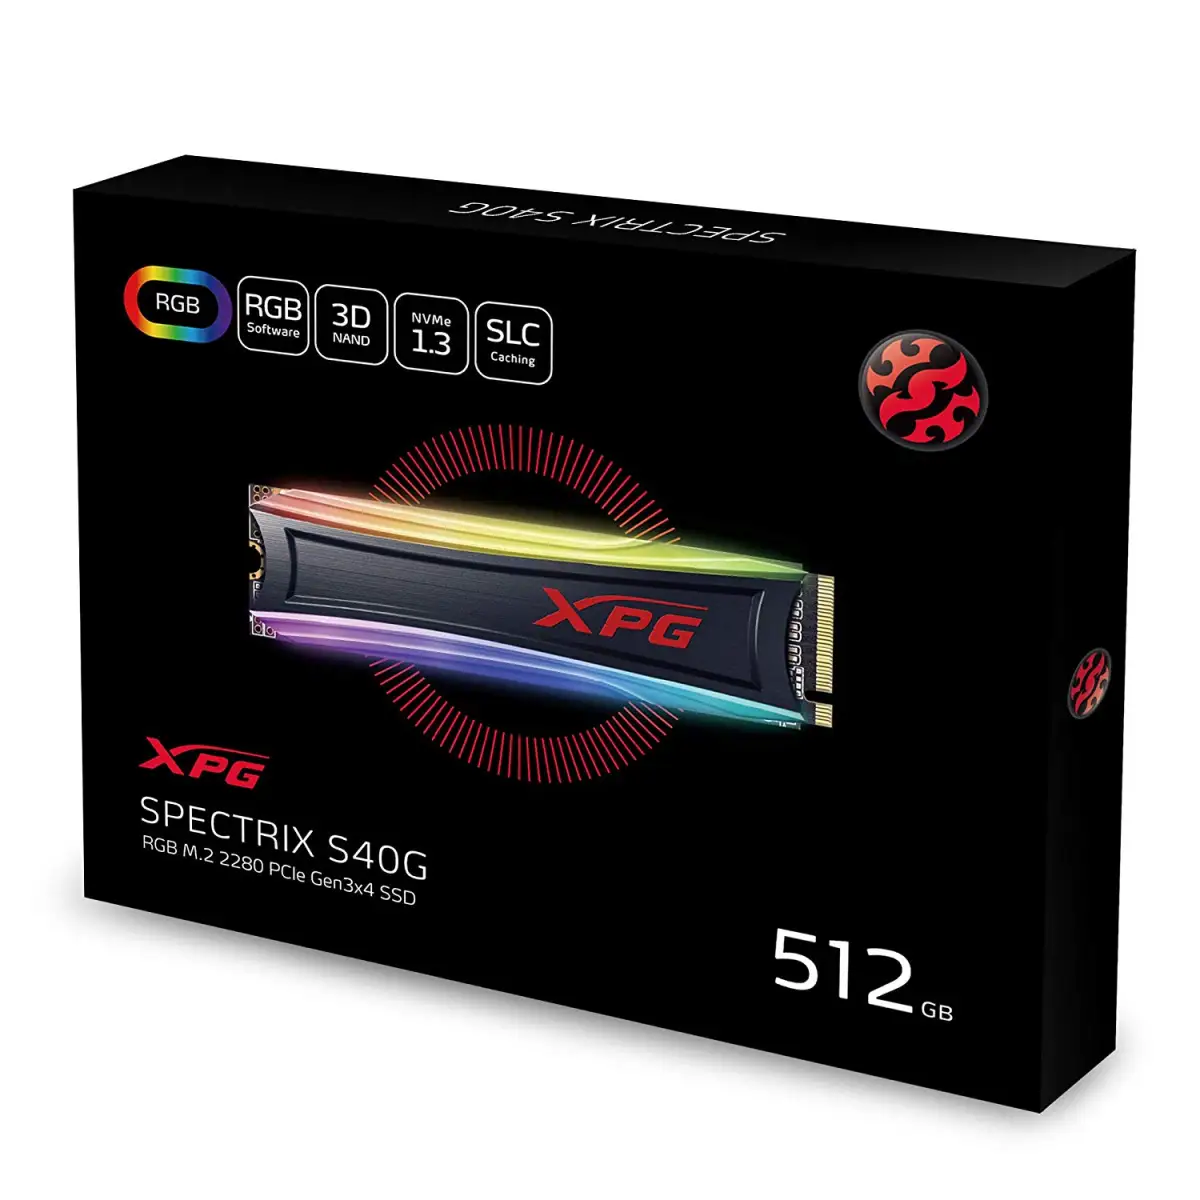 SOLID STATE DISK 512GB ADATA M.2 NVME GAMING XPG S40G AS40G-512GT-C